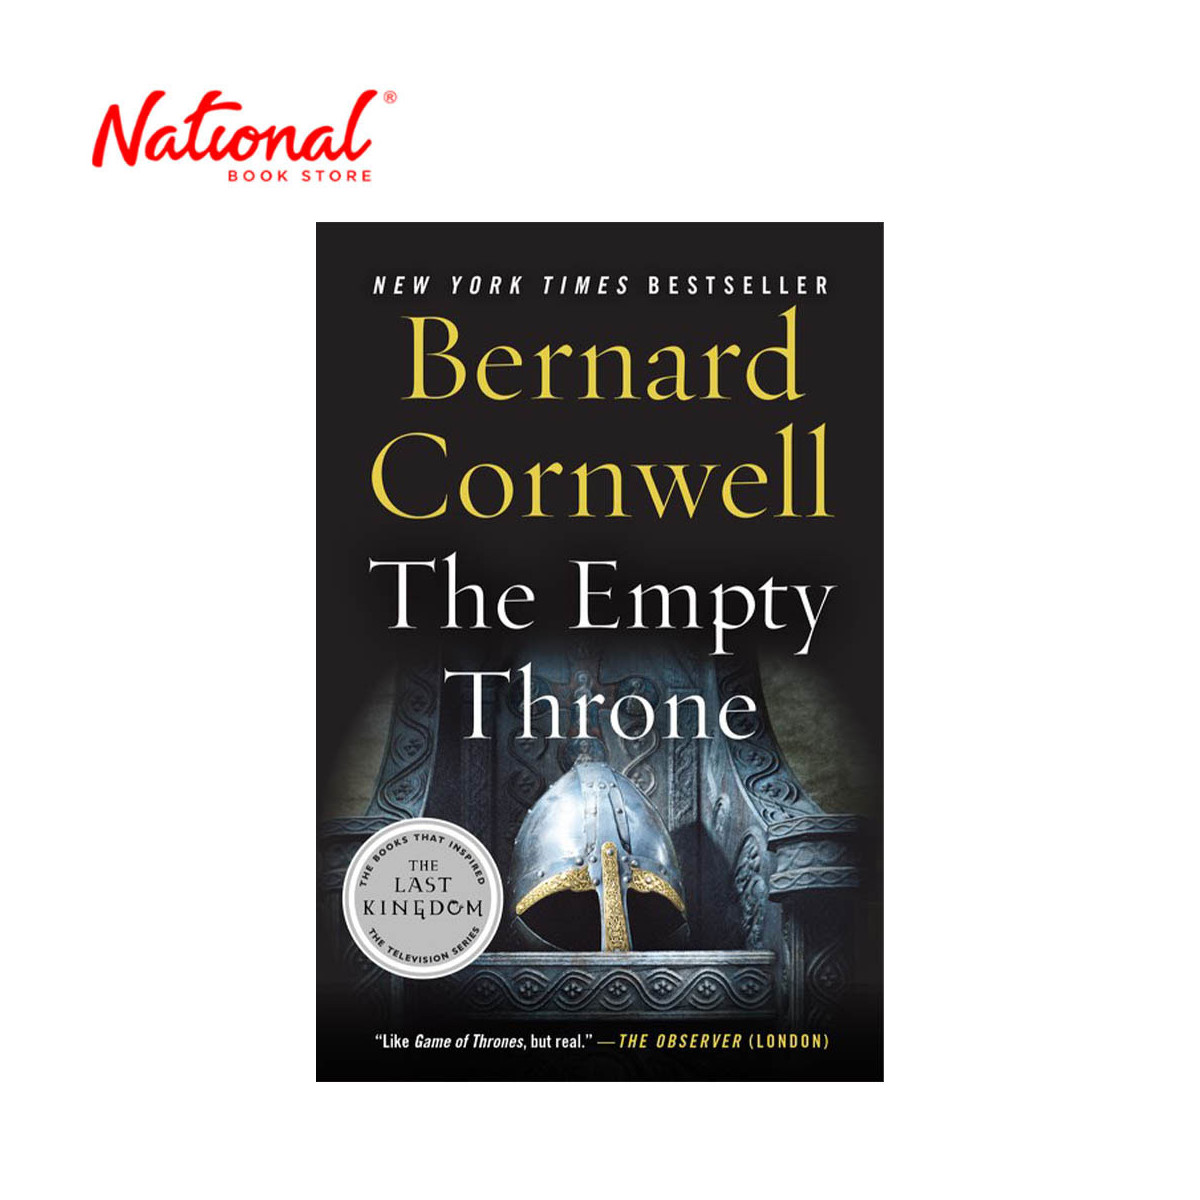 The Empty Throne by Bernard Cornwell - Trade Paperback - Contemporary Fiction